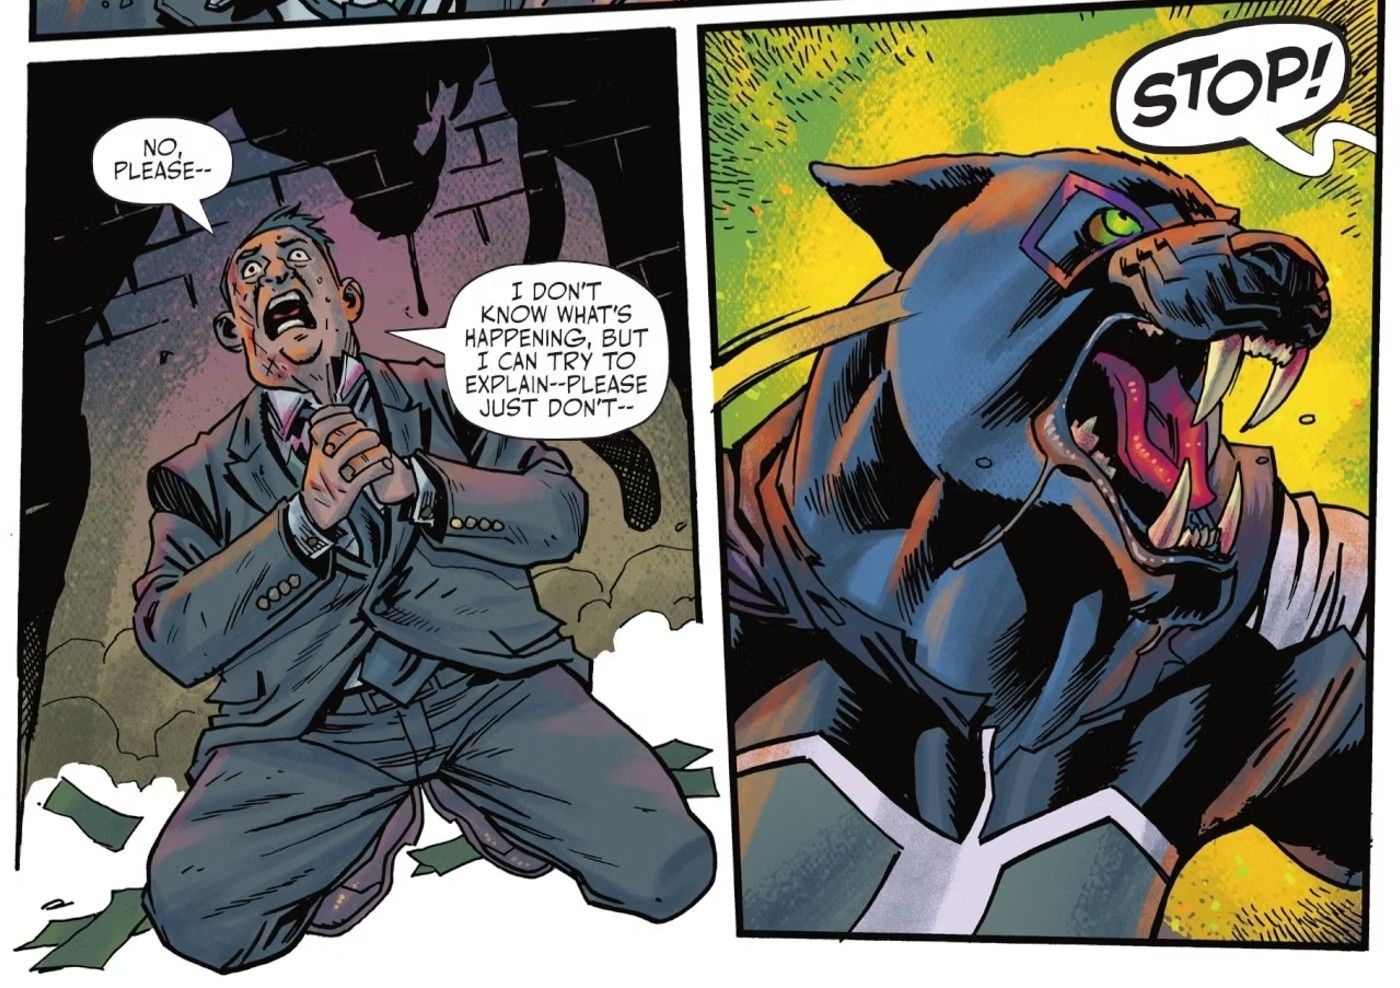 Comic book panels: a man in a suit pleads with a panther in a superhero costume.